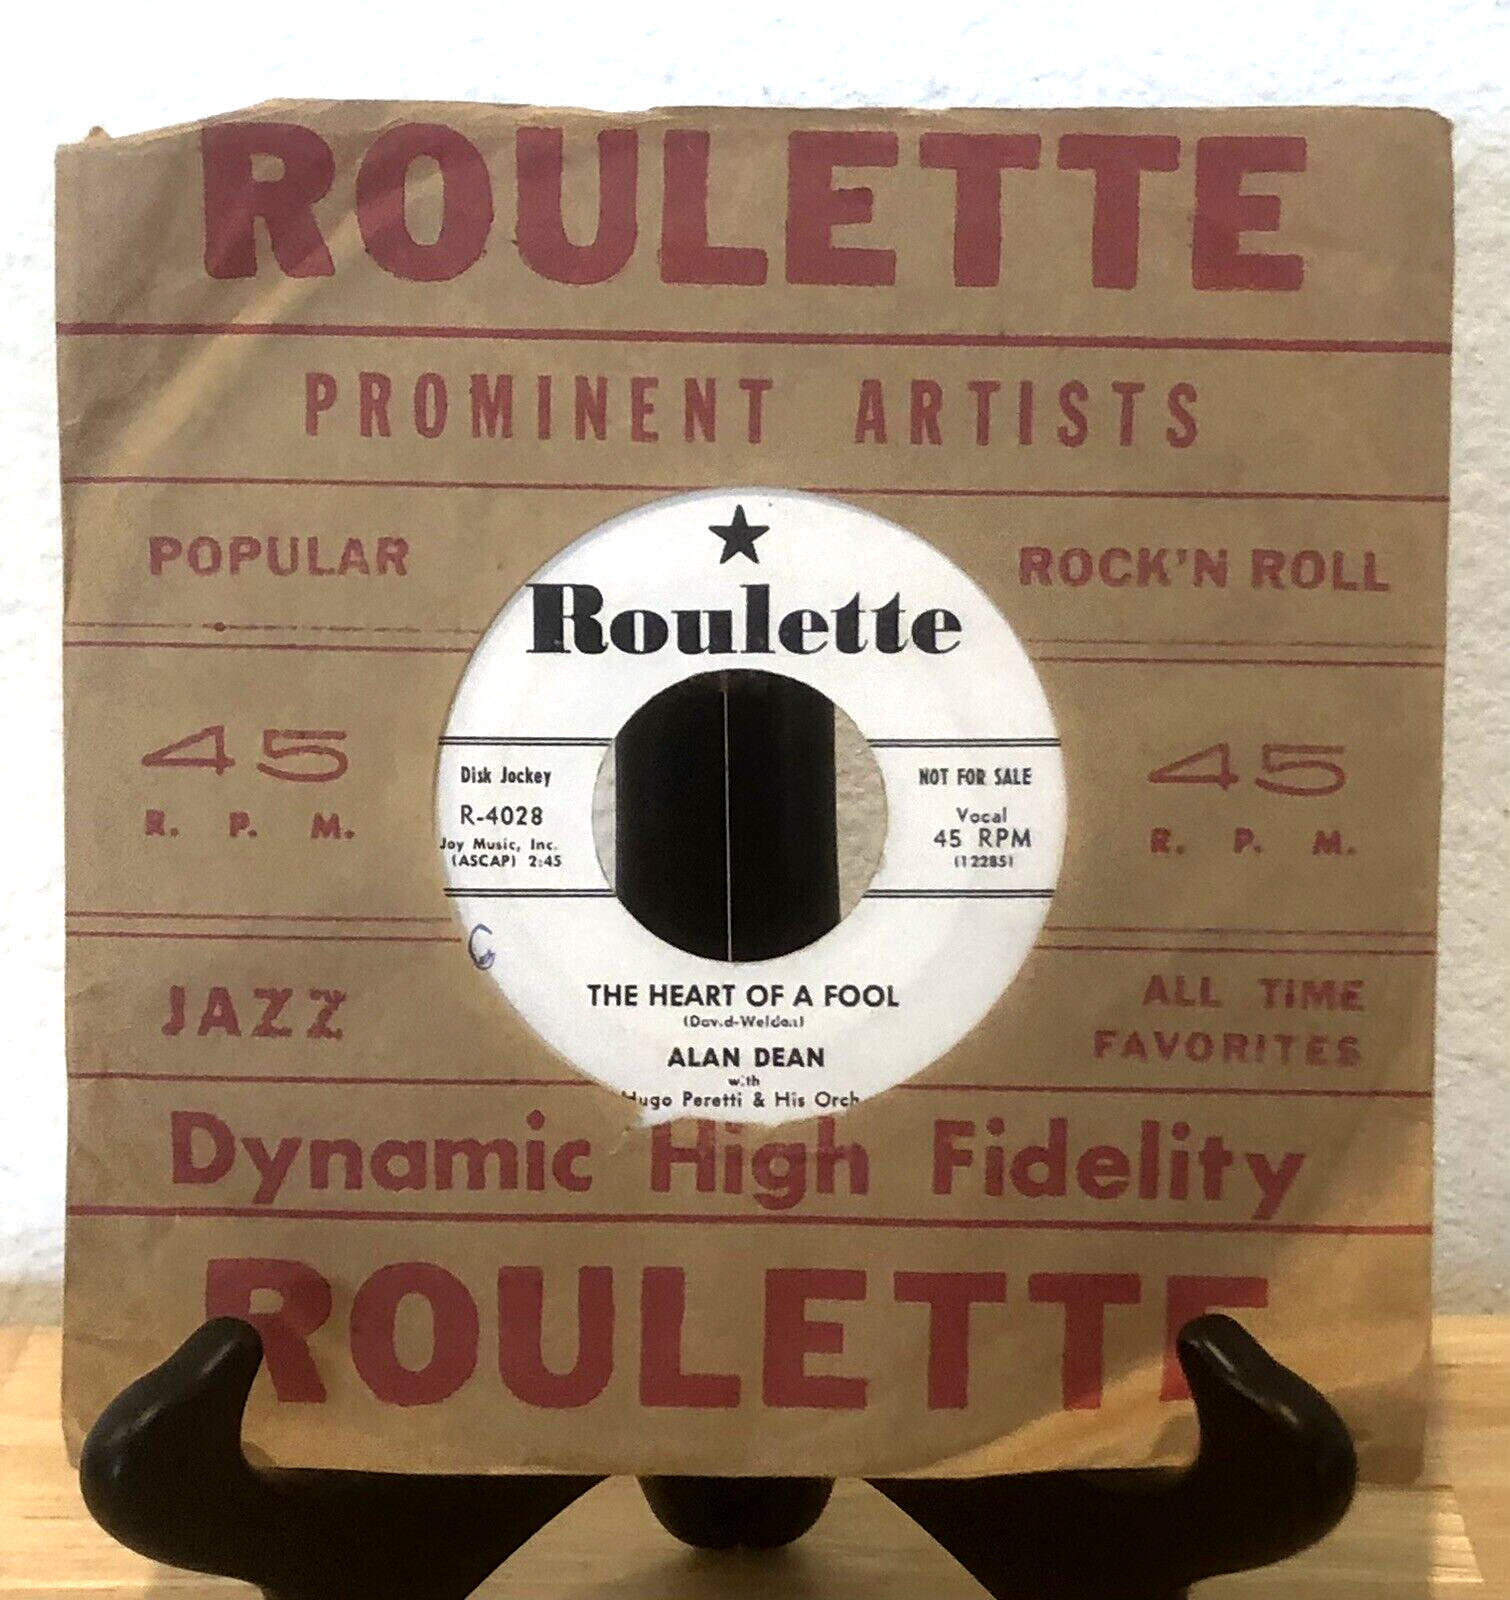 VINTAGE 1957 ROULETTE PROMO ALAN DEAN THE HEART OF A FOOL 45 RPM RECORD